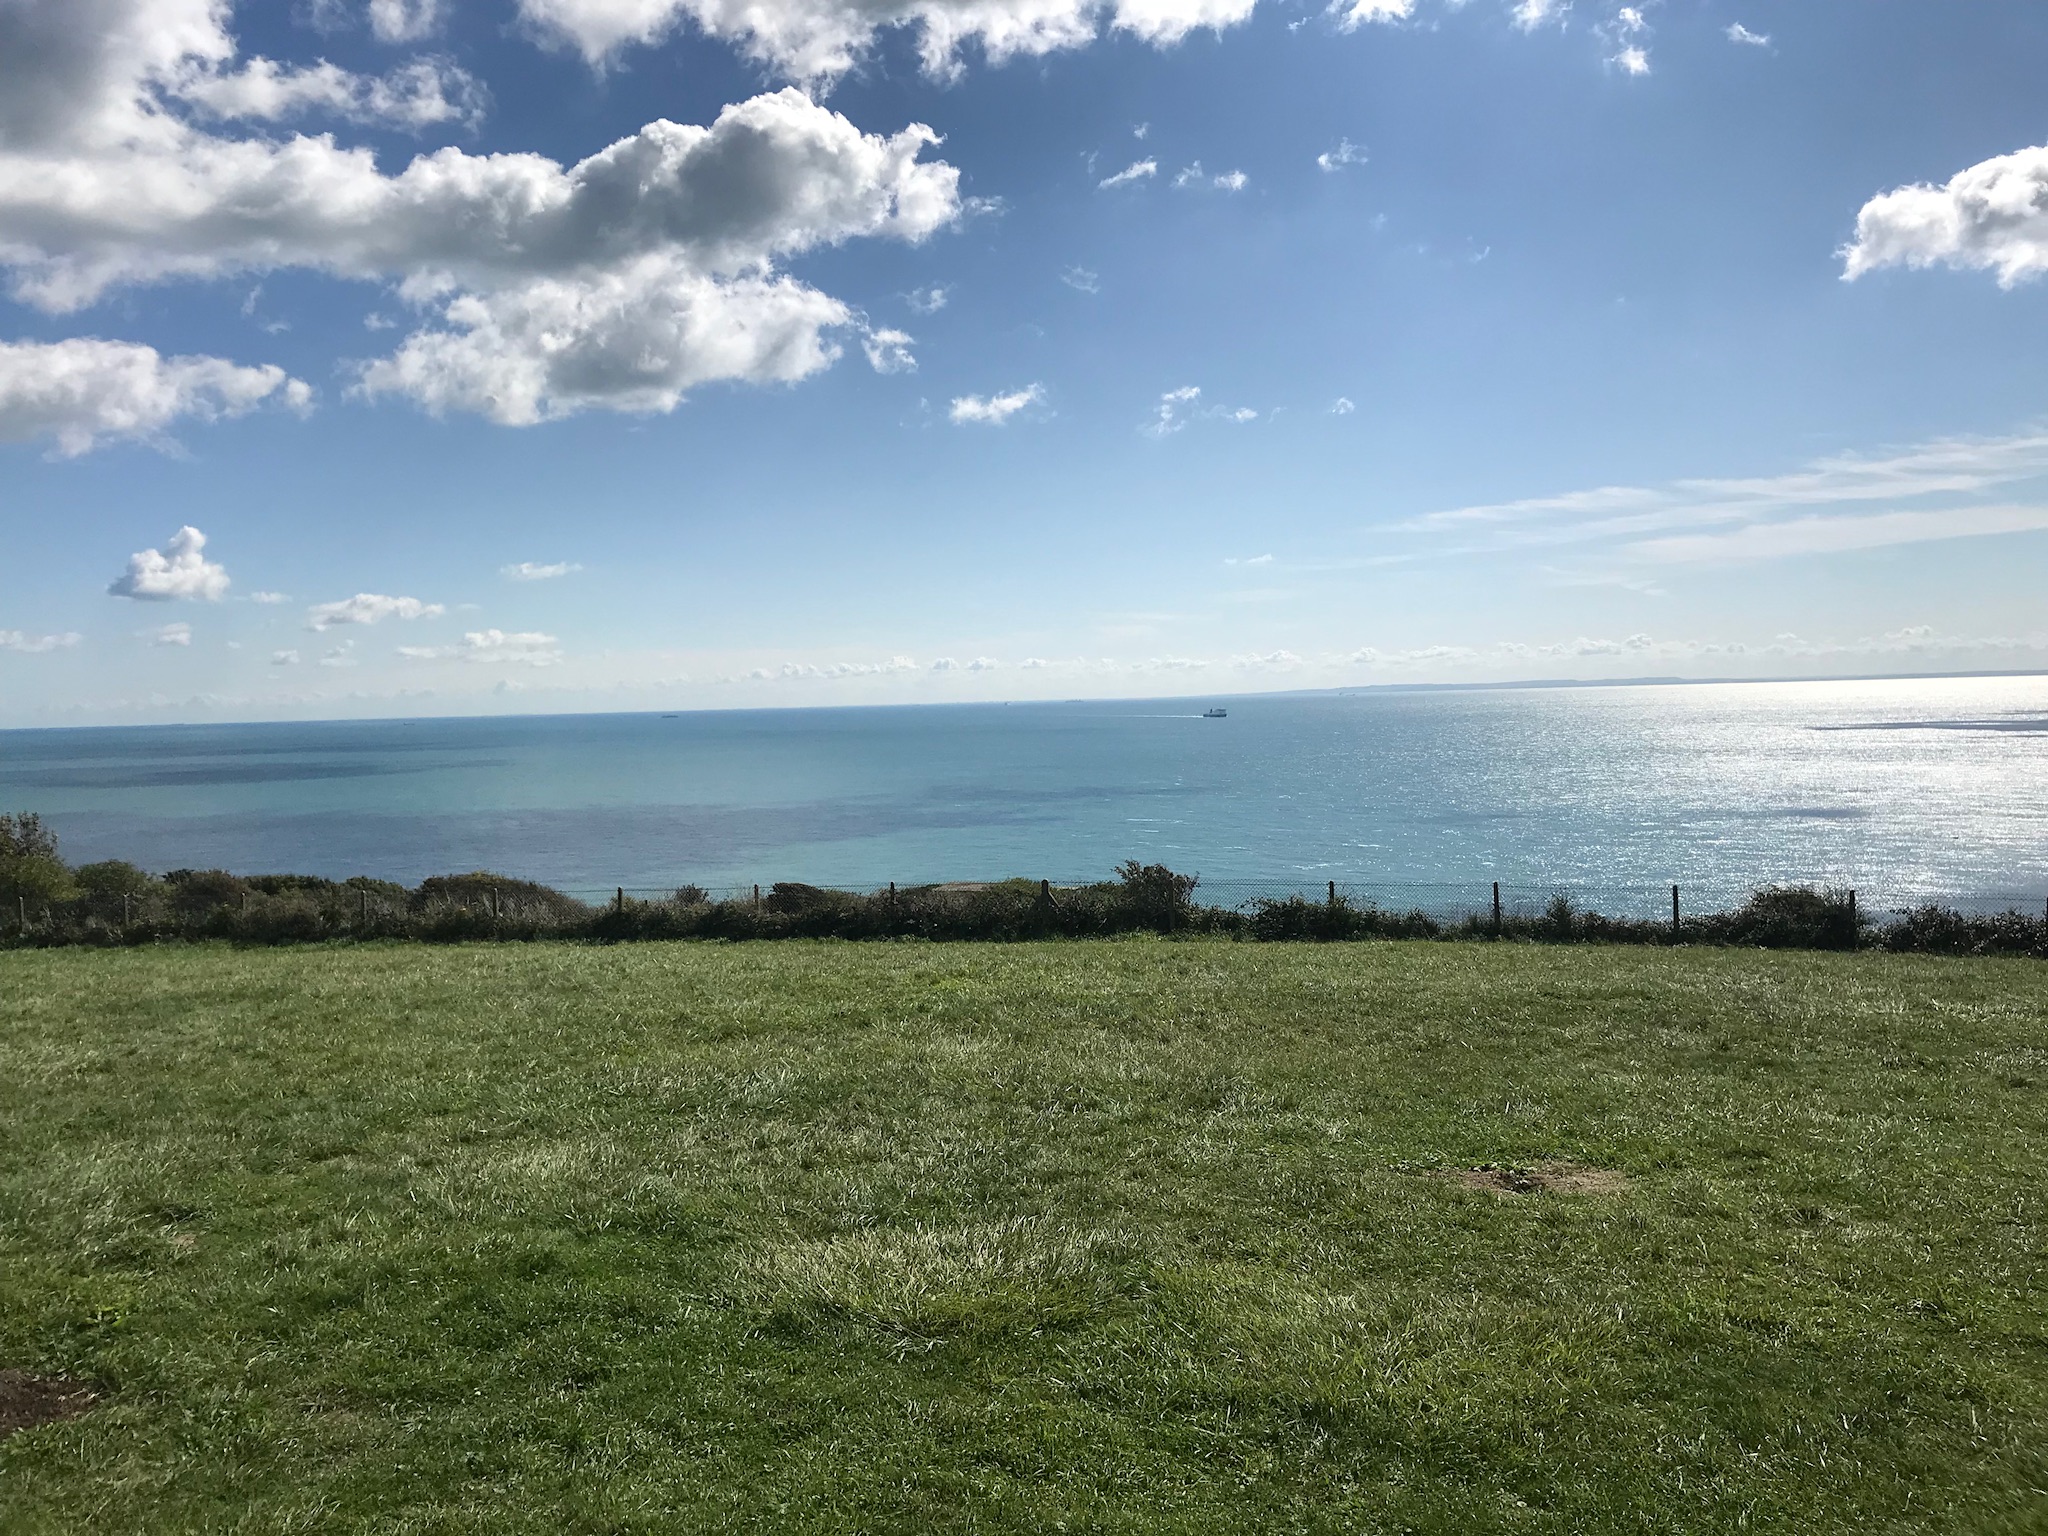 The view of the French coast from South Foreland Lighthouse.